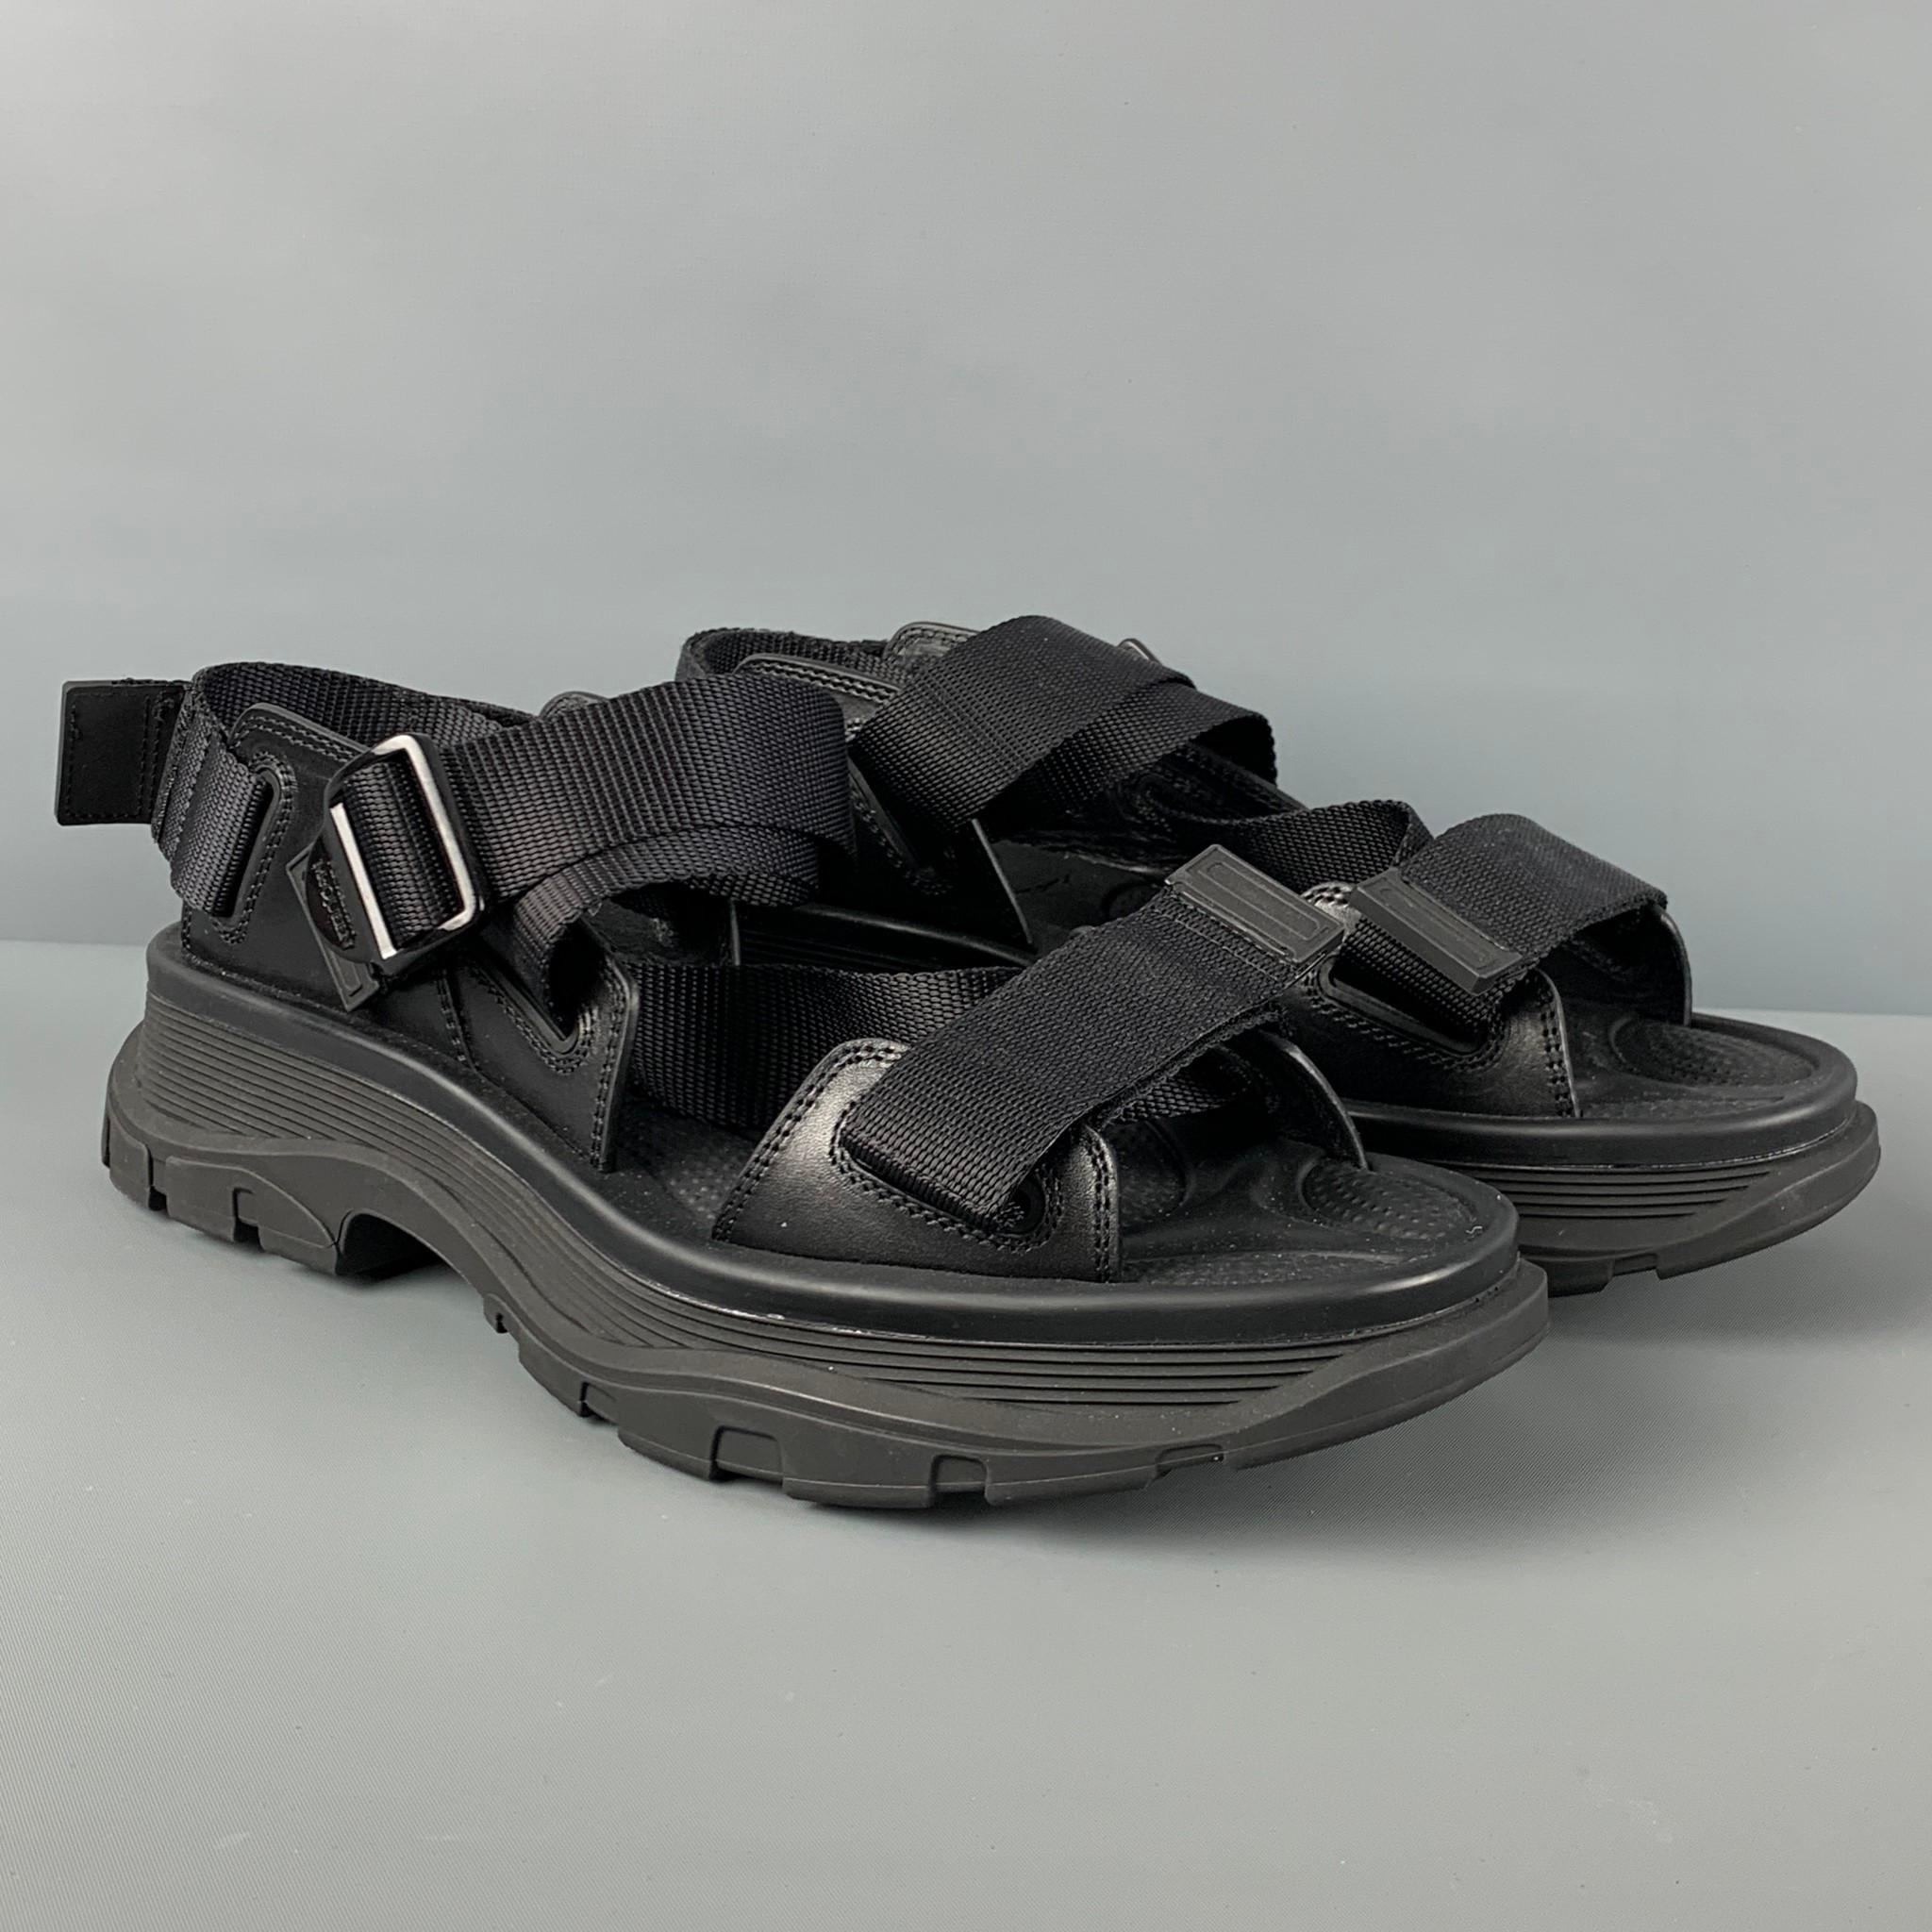 ALEXANDER McQUEEN sandals comes in a black material with a leather trim featuring a adjustable strap and a chunky rubber sole. Includes box.

Excellent Pre-Owned Condition.
Marked: 42.5
Original Retail Price: $690.00

Outsole: 12.5 in. x 5 in.